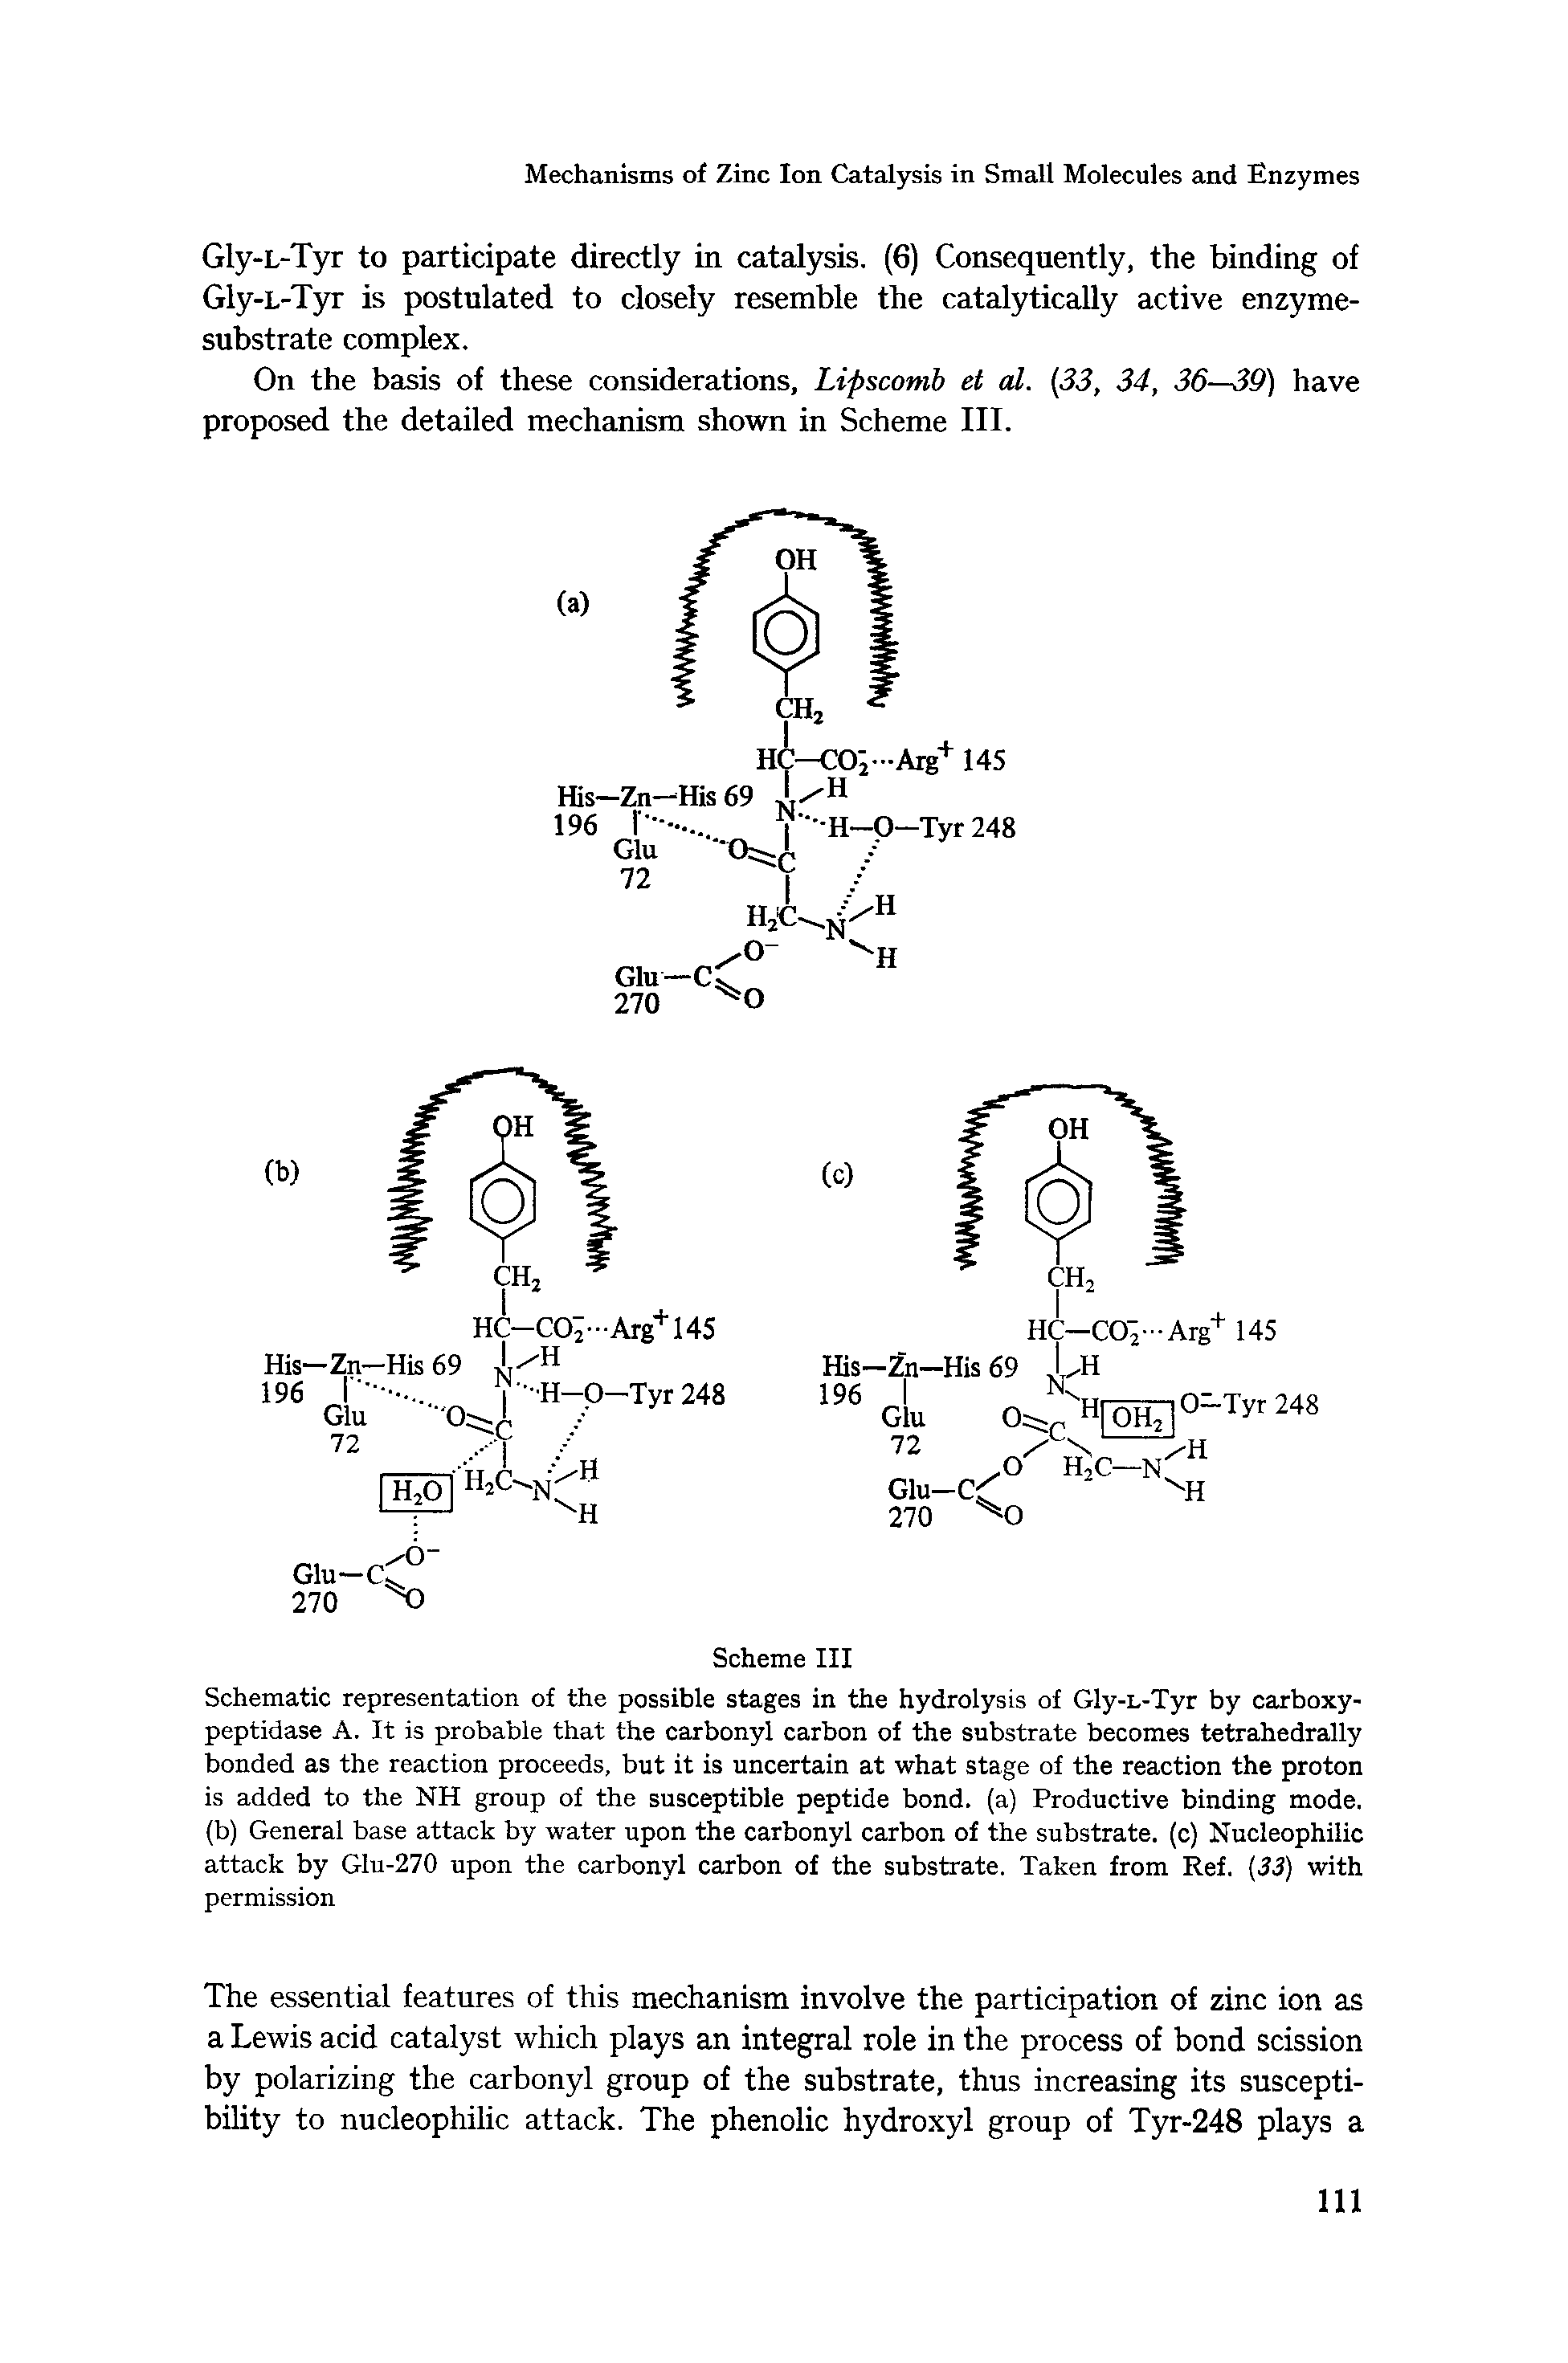 Schematic representation of the possible stages in the hydrolysis of Gly-L-Tyr by carboxy-peptidase A. It is probable that the carbonyl carbon of the substrate becomes tetrahedrally bonded as the reaction proceeds, but it is uncertain at what stage of the reaction the proton is added to the NH group of the susceptible peptide bond, (a) Productive binding mode, (b) General base attack by water upon the carbonyl carbon of the substrate, (c) Nucleophilic attack by Glu-270 upon the carbonyl carbon of the substrate. Taken from Ref. [33) with permission...